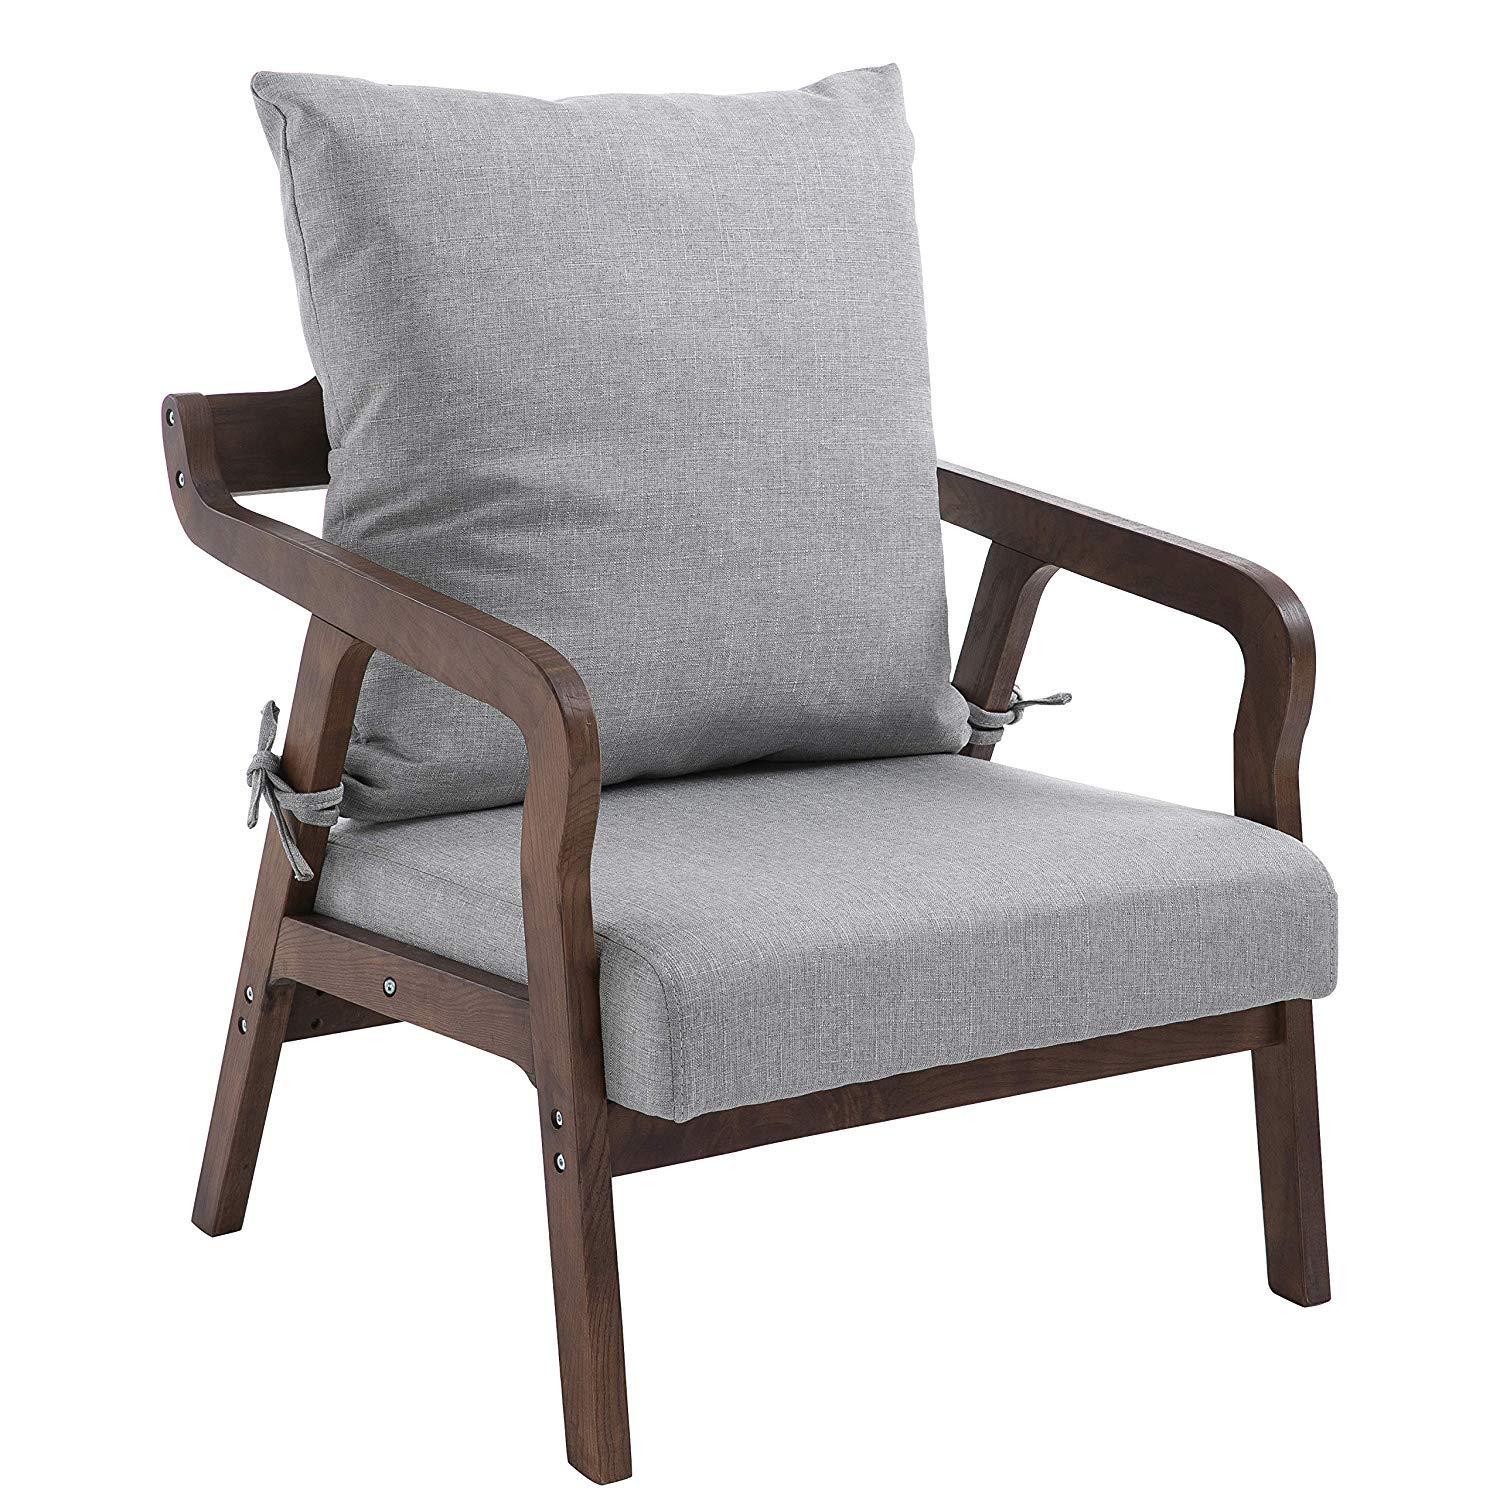 Bentwood Grey Fabric Armchair Accent Chair with Solid Wood Frame - DaAl's